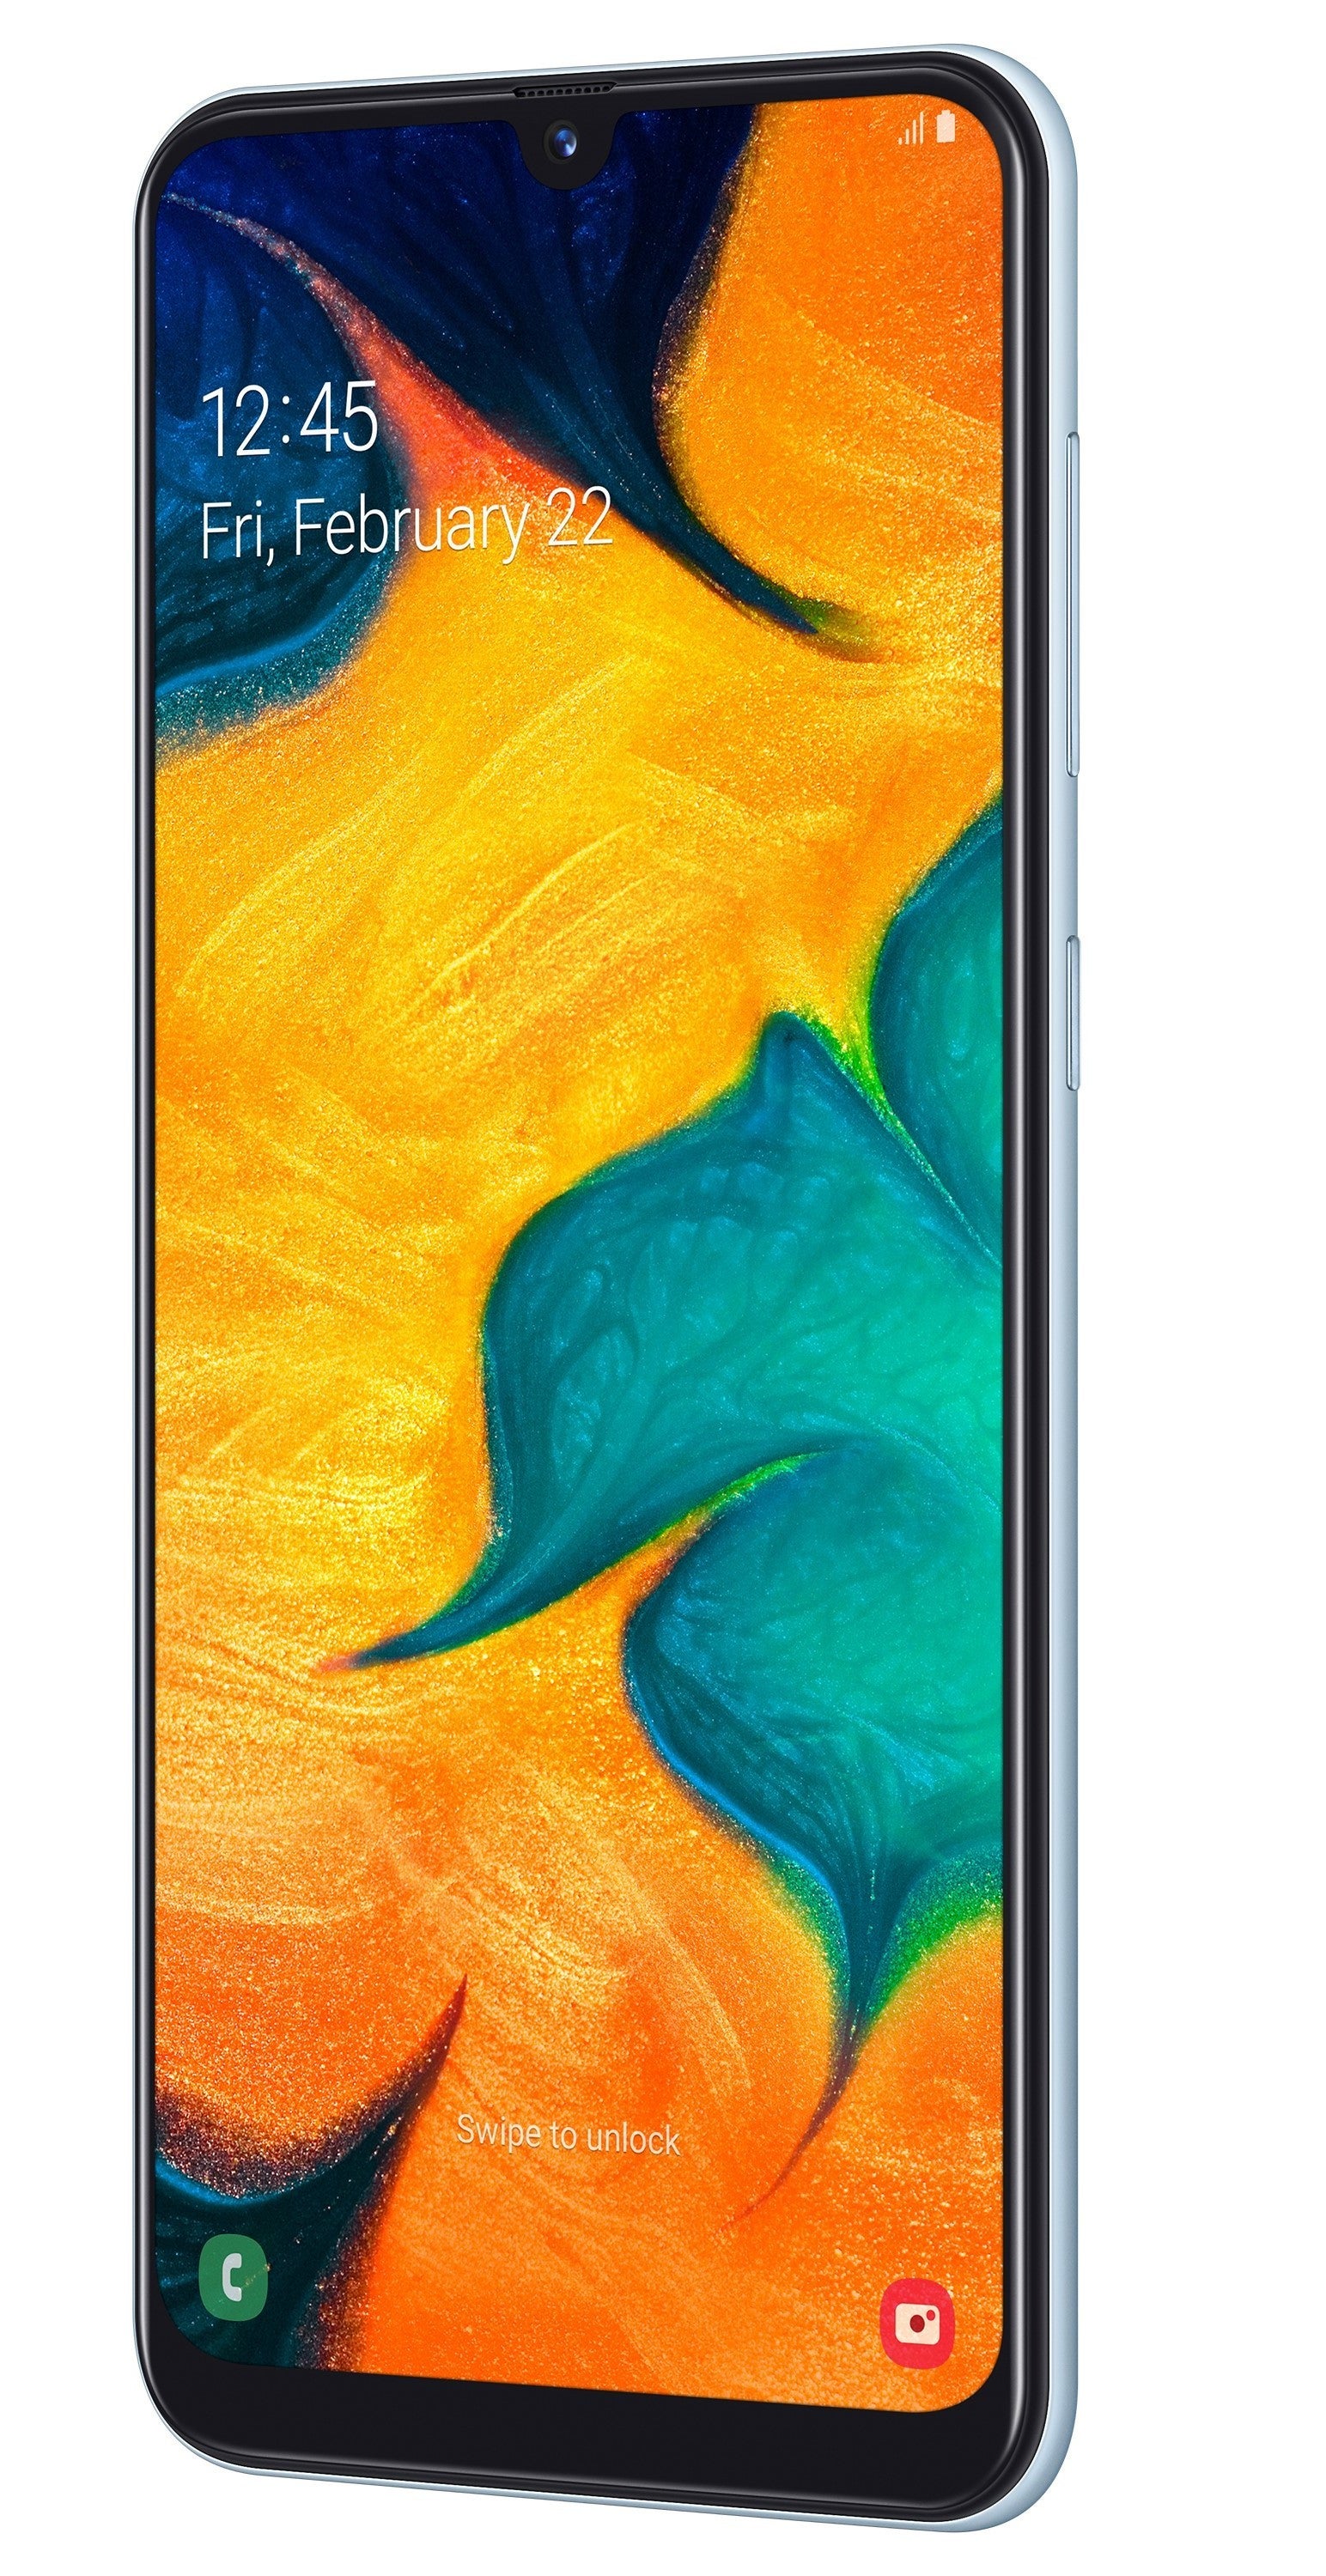 Samsung Galaxy A50 & A30 debut with Infinity-U displays, ultra-wide cameras